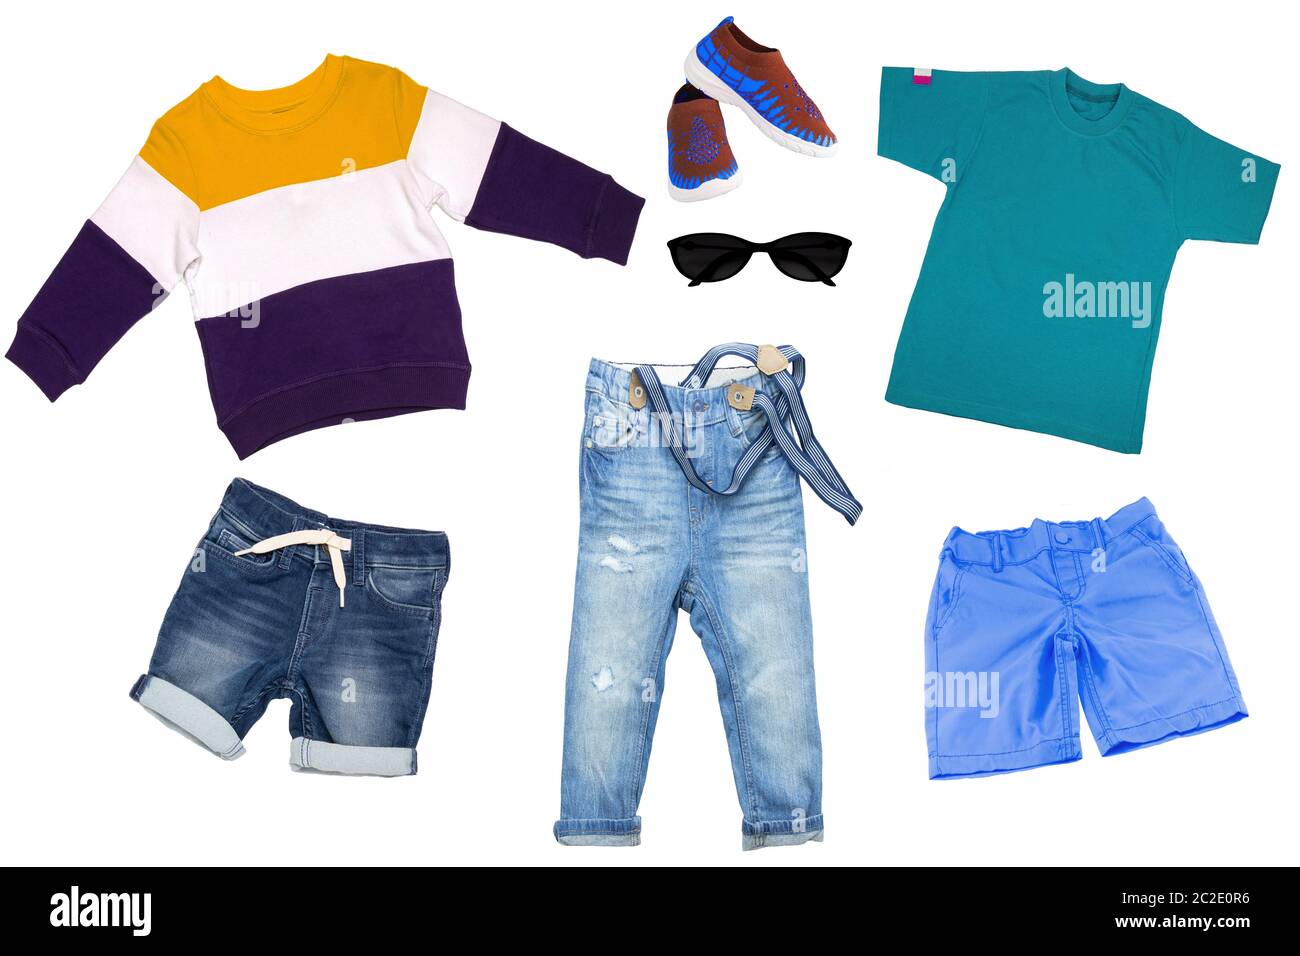 Collage set of children clothes. Denim jeans or pants, short jeans, a pair shoes , blue short pants, shirt and a sweater for child boy isolated on a white background. Concept spring autumn and summer clothes. Stock Photo